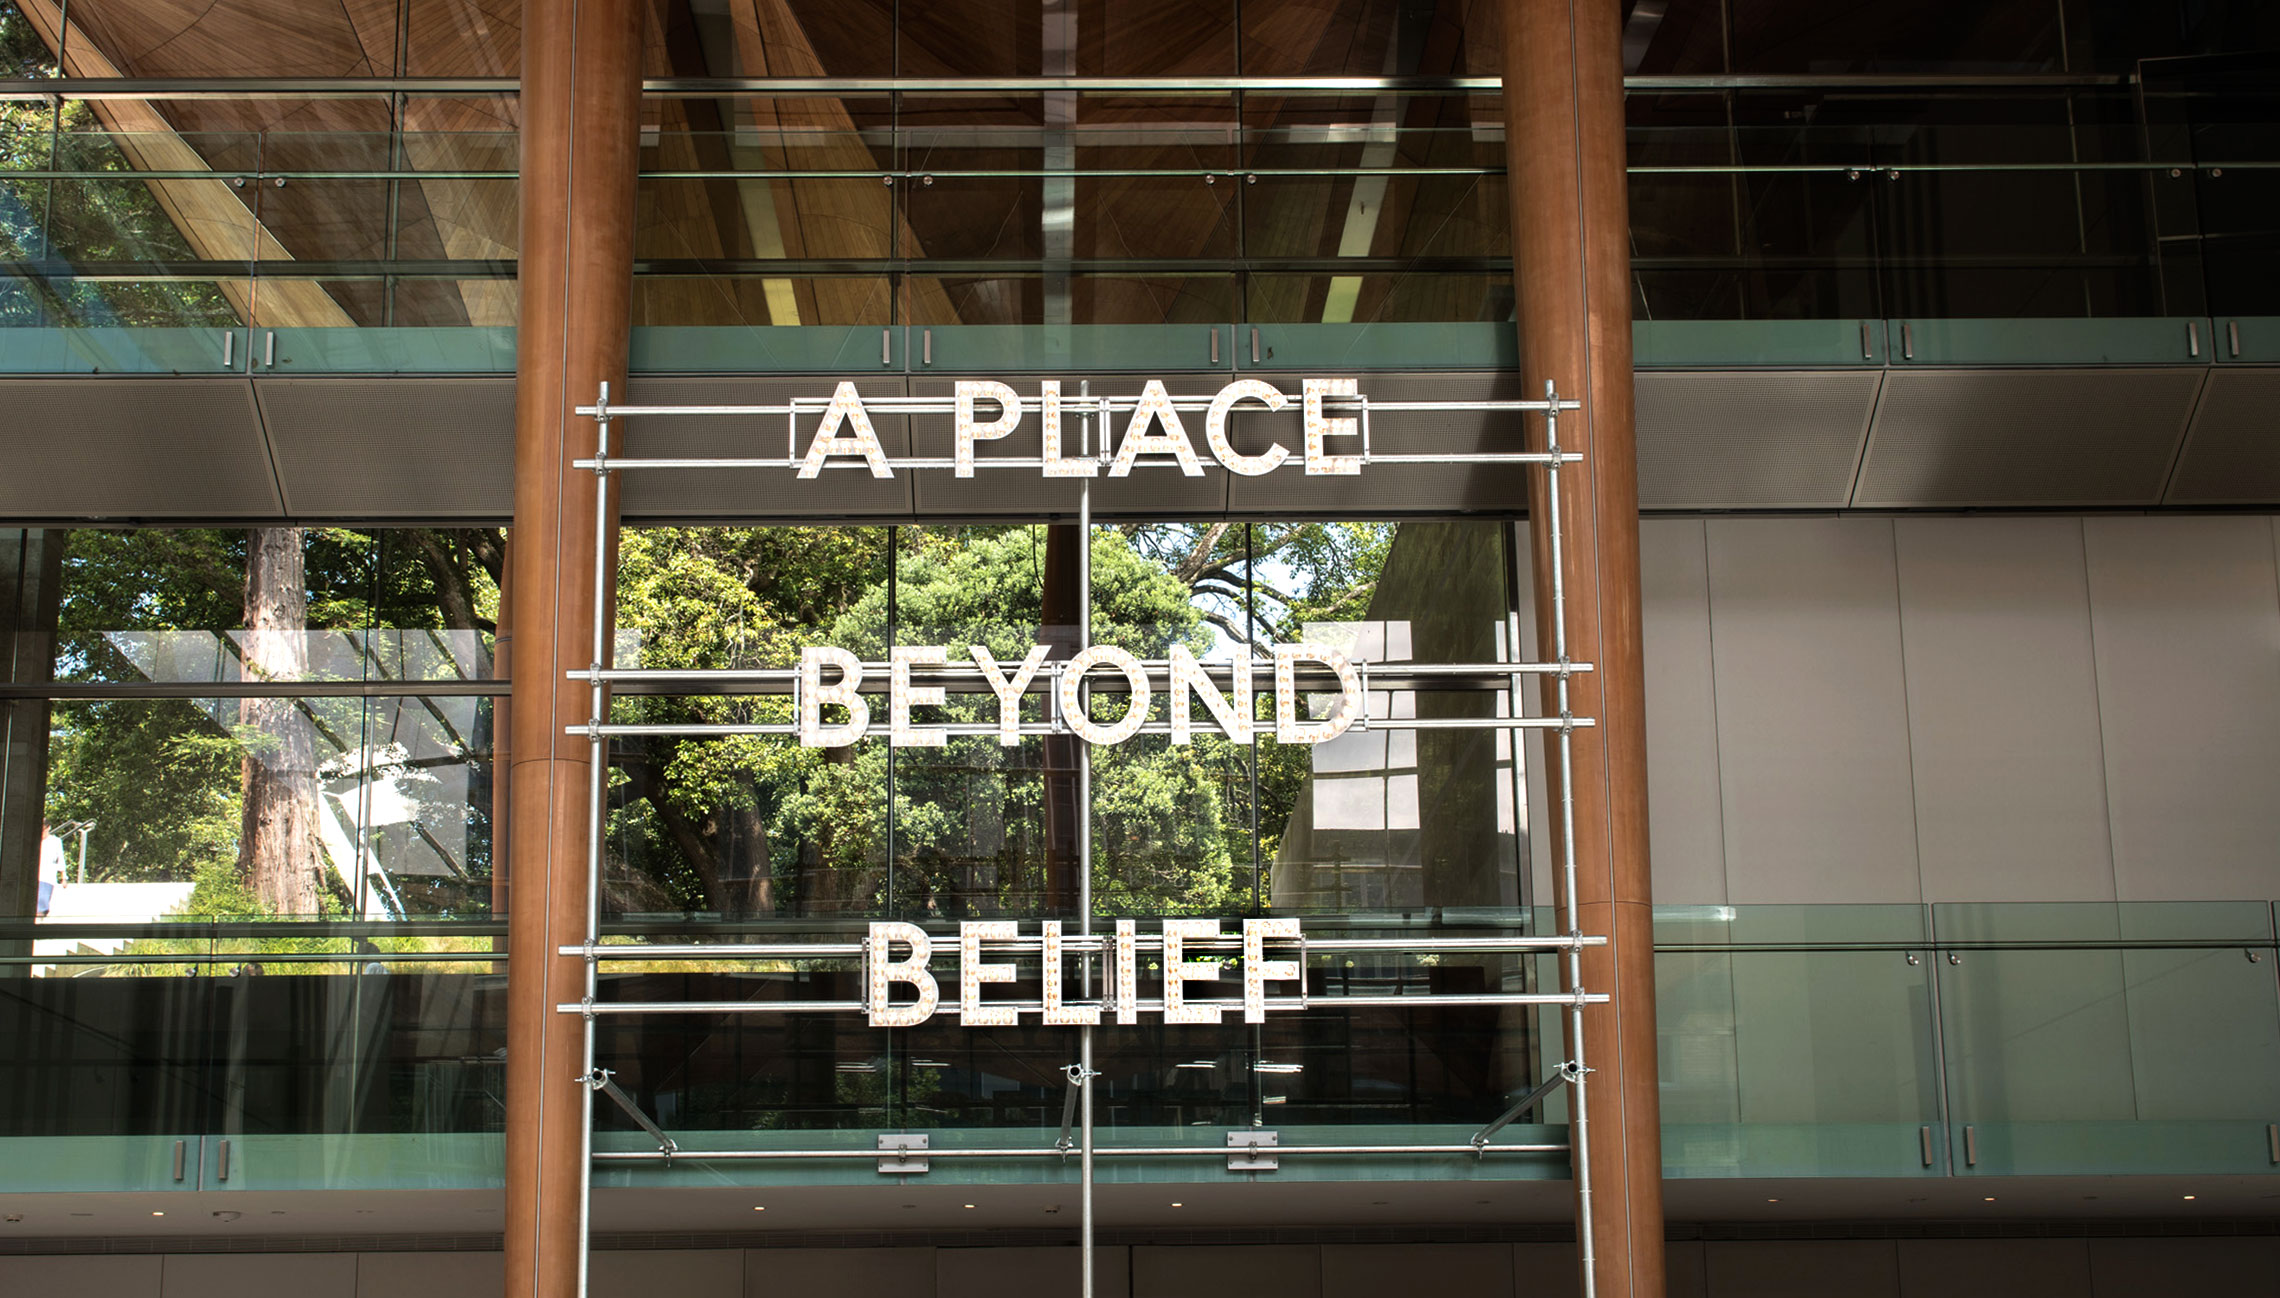 <p><strong>Nathan Coley</strong><br />
<em>A Place Beyond Belief</em>, 2019, (installation detail),<br />
Auckland Art Gallery Toi o Tāmaki.<br />
Gift of the Auckland Contemporary Art Trust.</p>